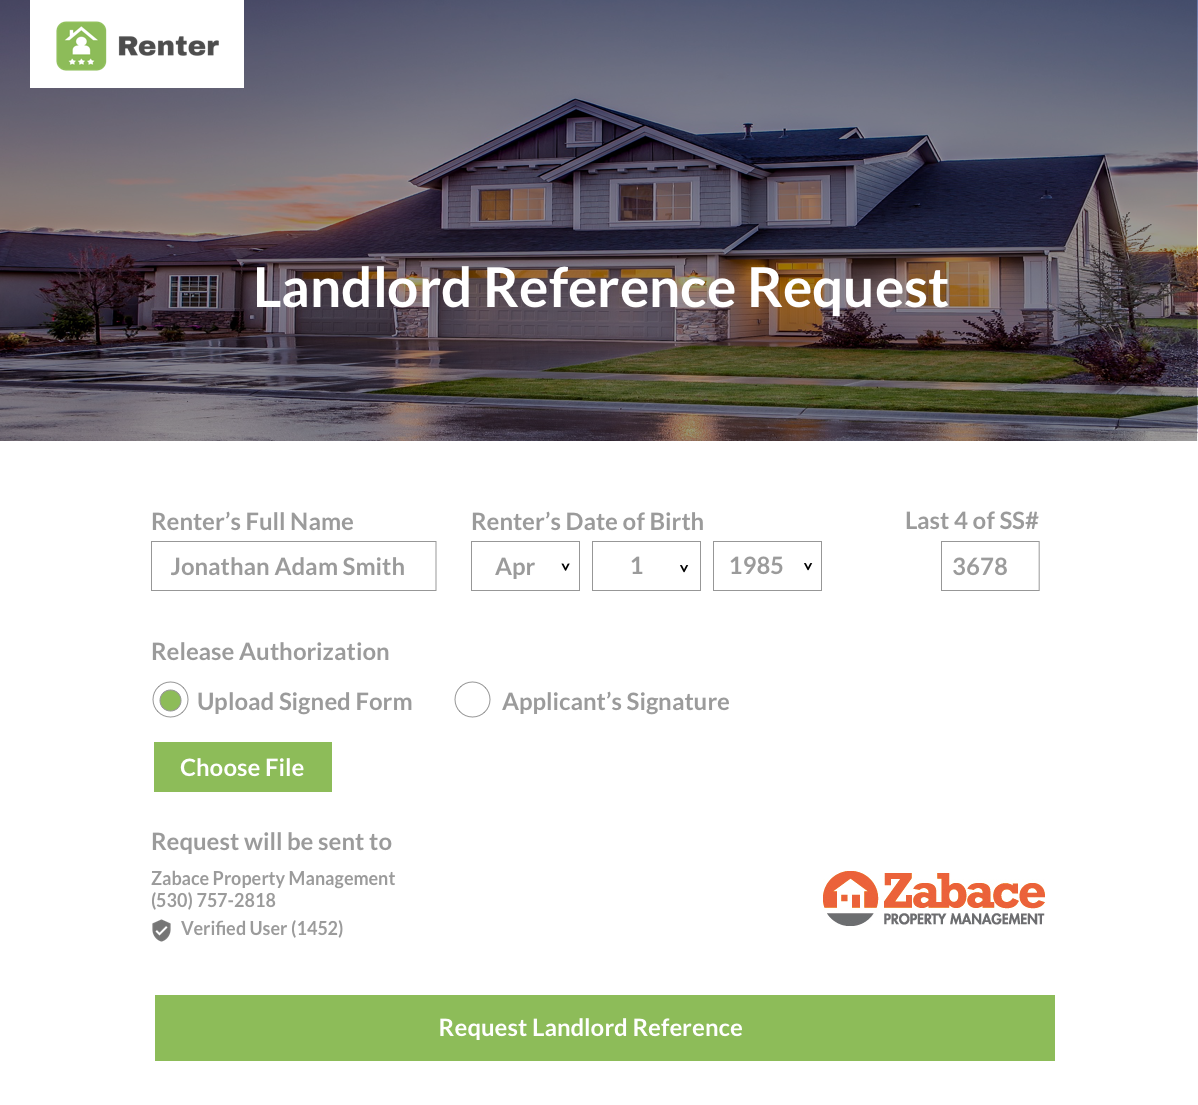 Accept Landlord Reference Online